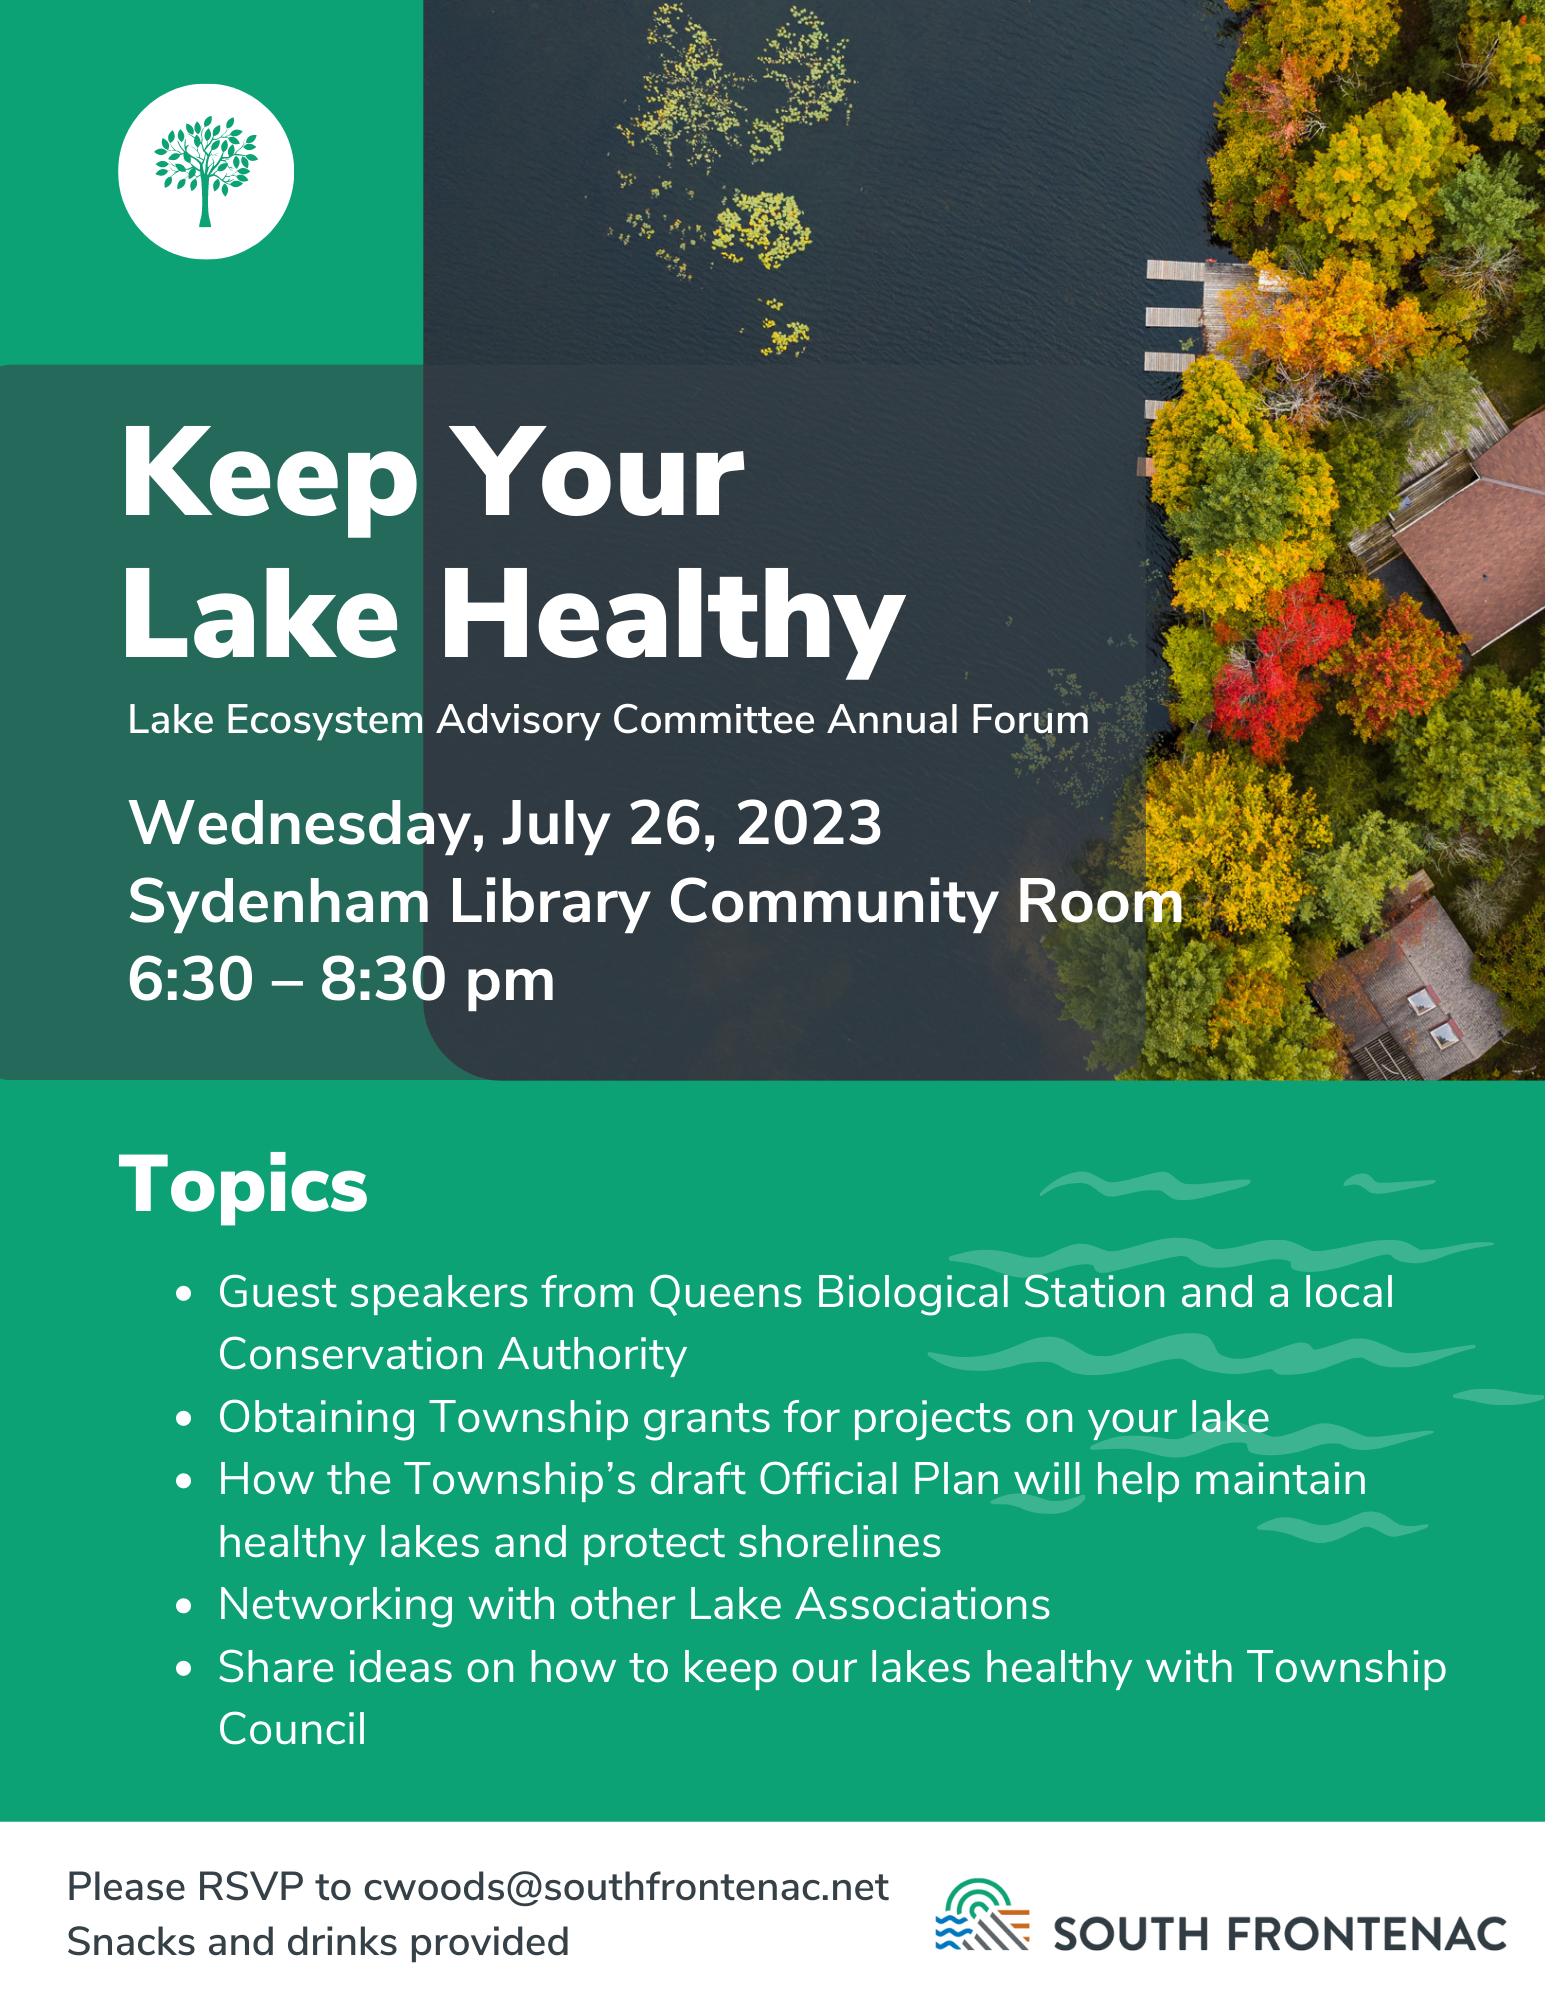 Keep Your Lake Healthy poster